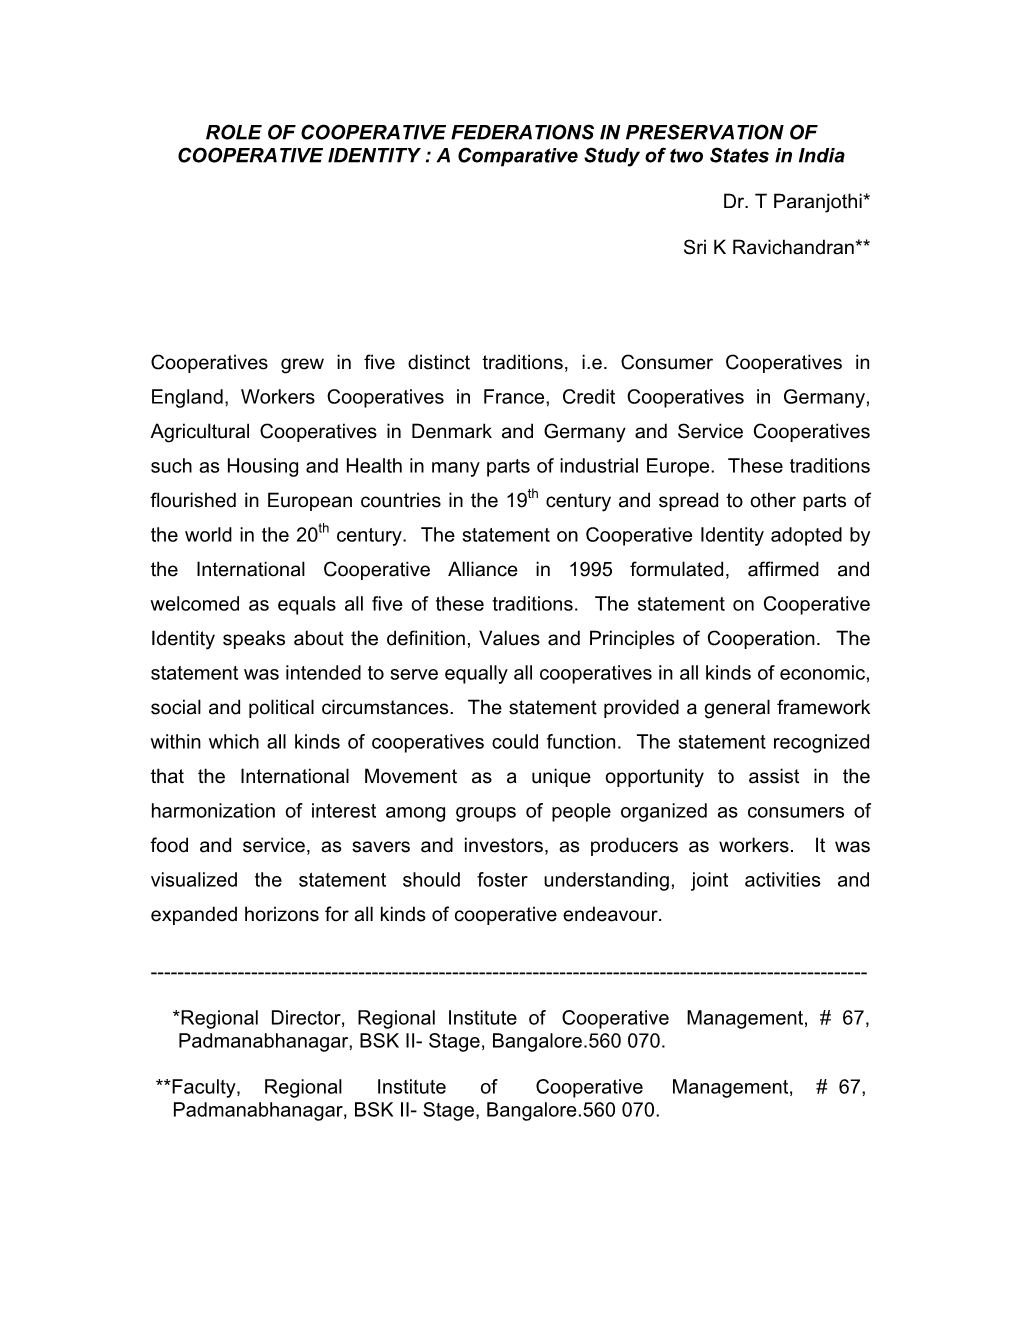 ROLE of COOPERATIVE FEDERATIONS in PRESERVATION of COOPERATIVE IDENTITY : a Comparative Study of Two States in India